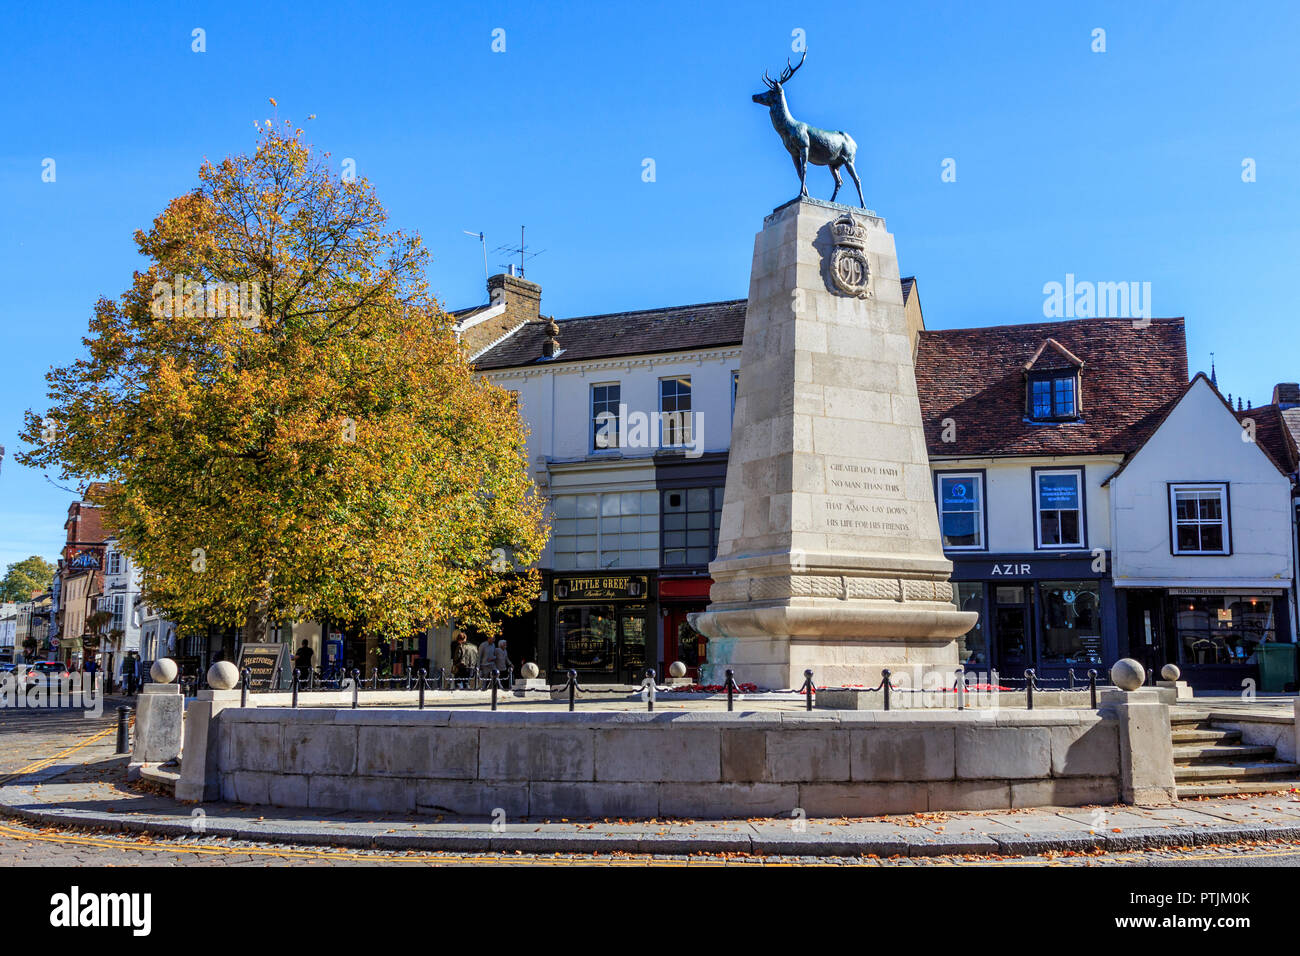 war memorial with county stag symbol aloft, Hertford town centre shopping and attractions, the county town of Hertfordshire, England Stock Photo